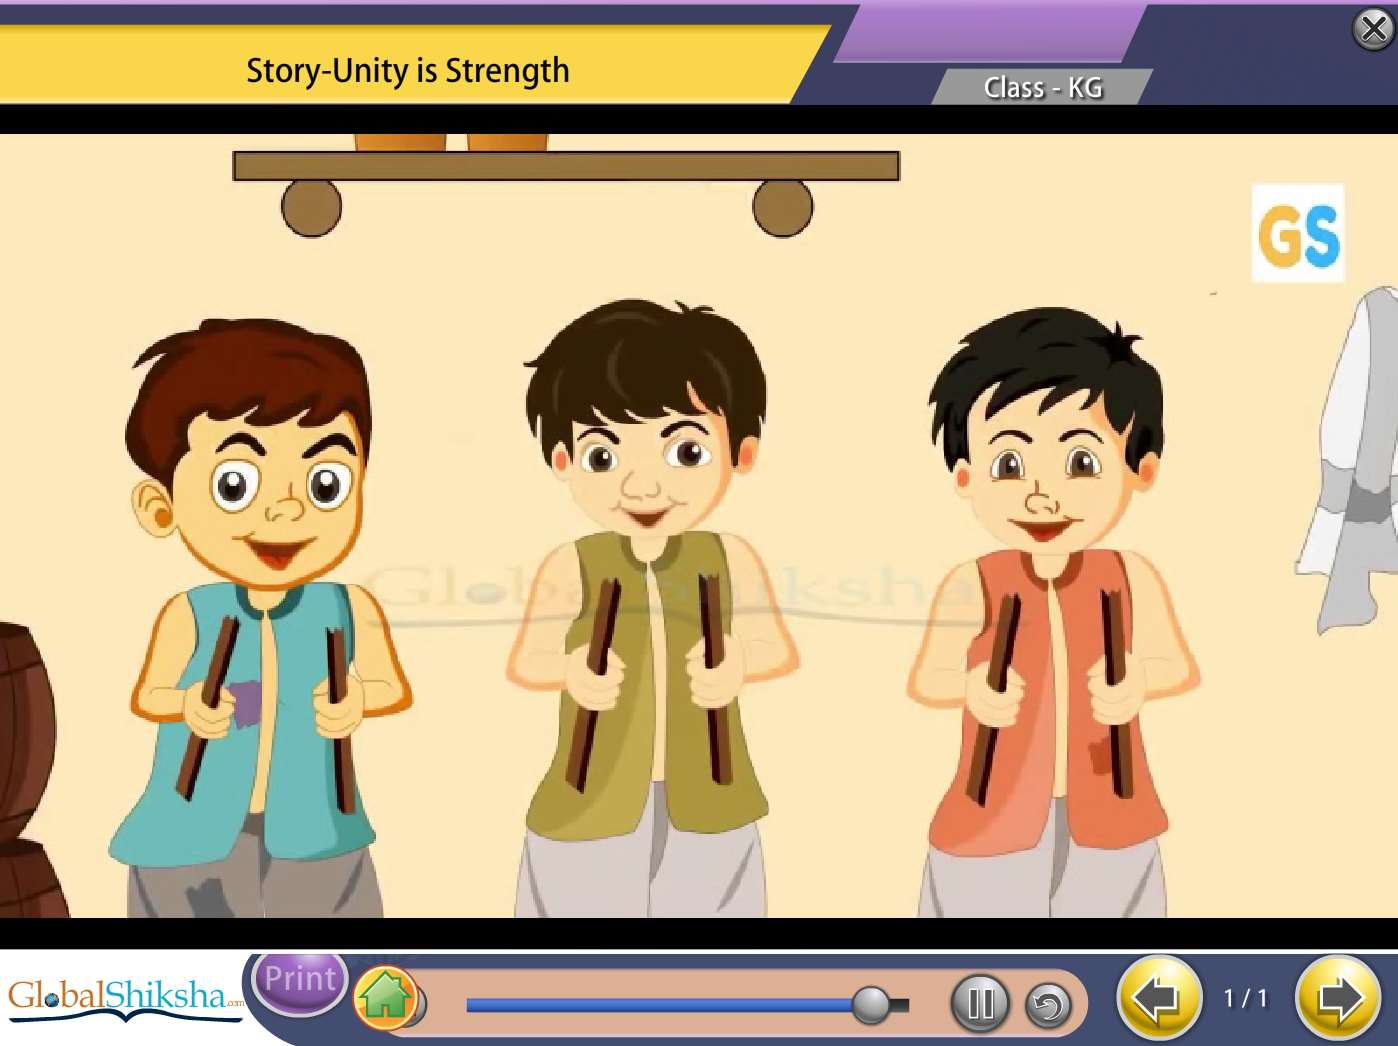 ICSE LKG General knowledge, Stories & Rhymes Animated Pendrive in English